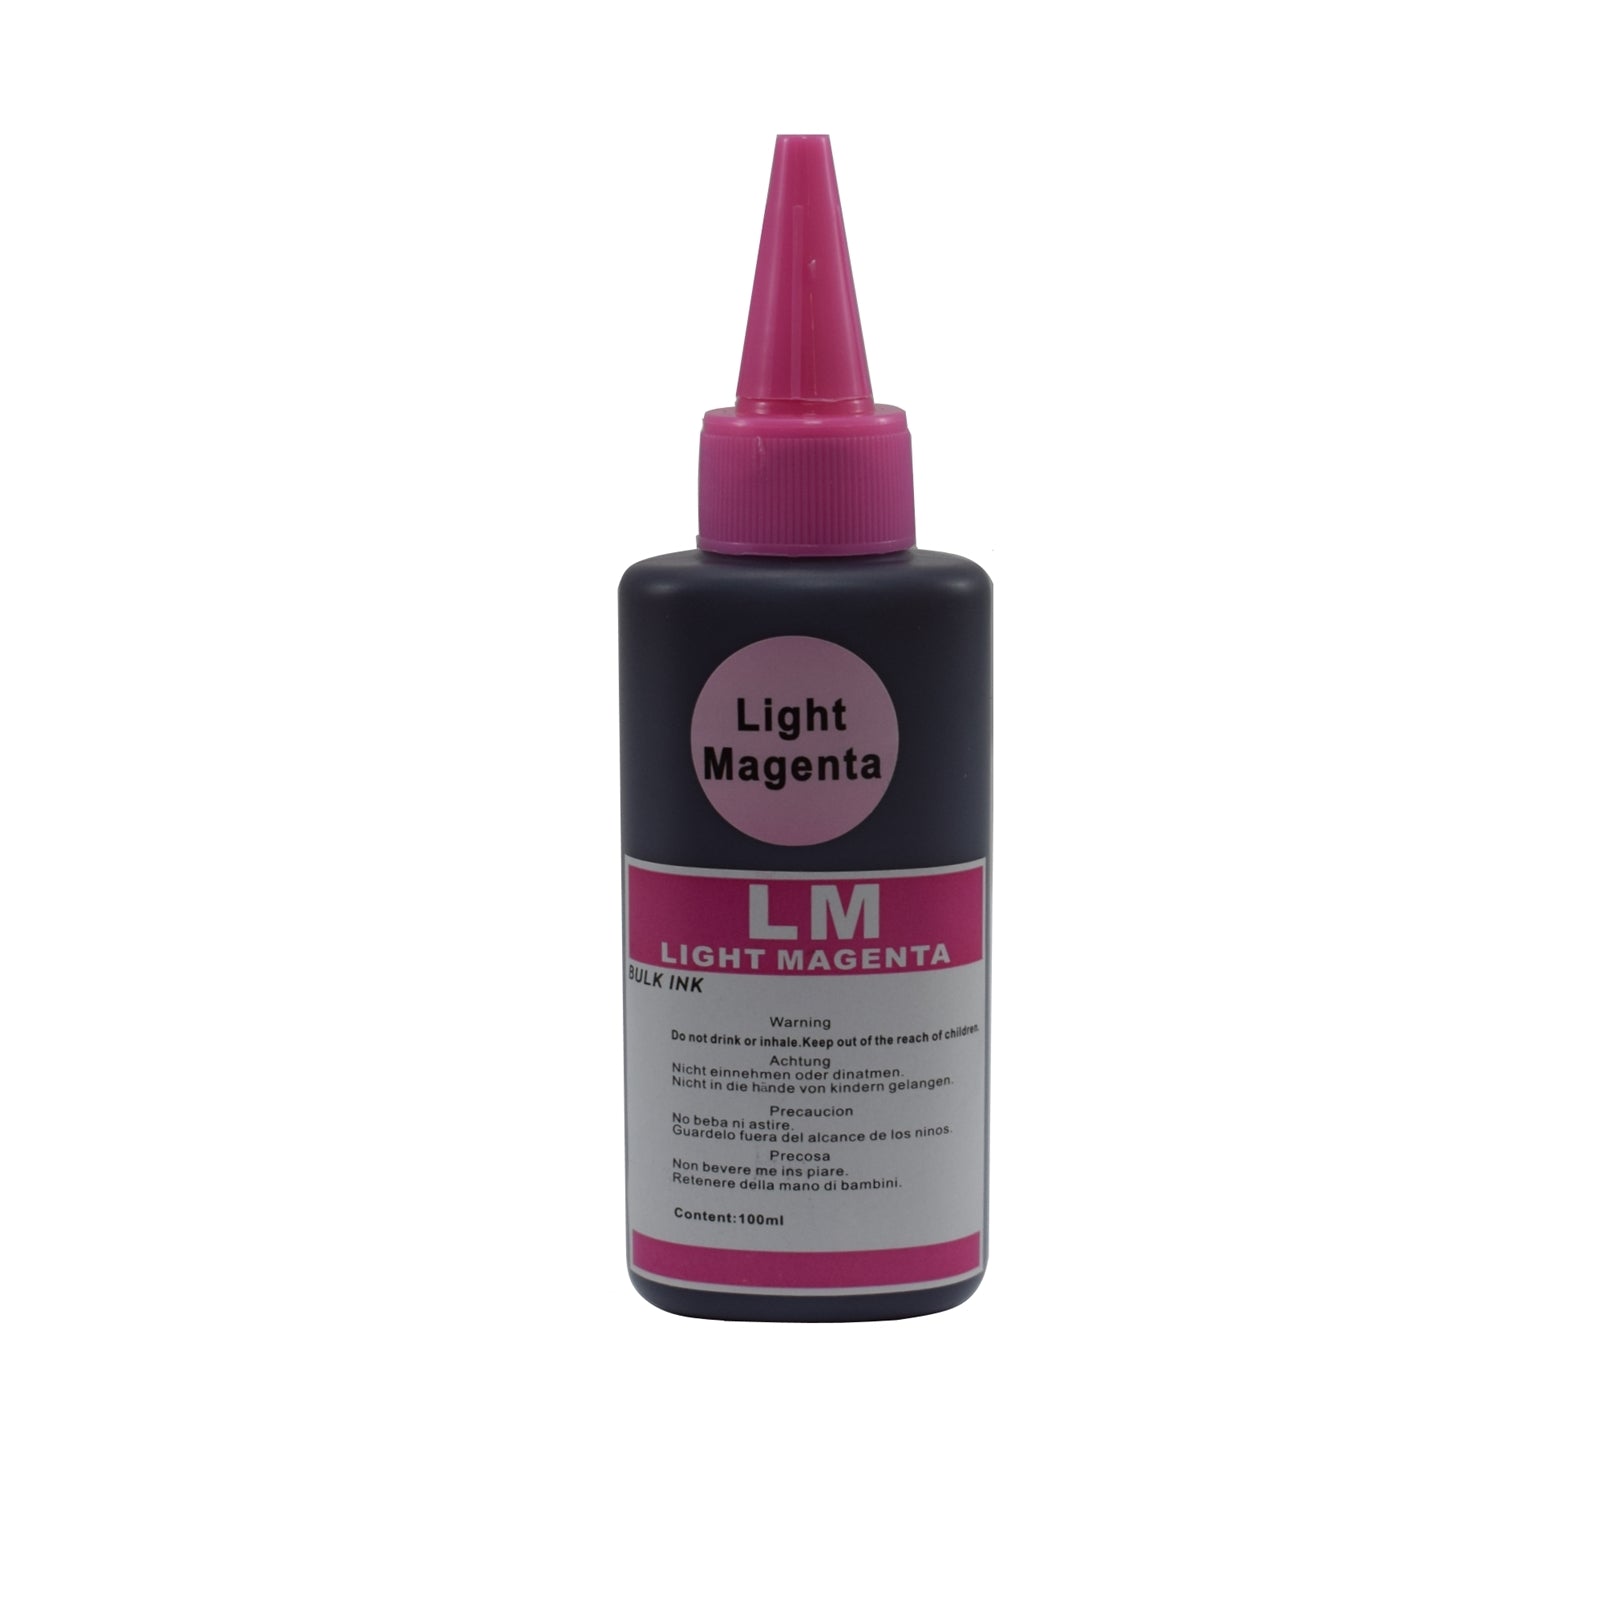 InkLab Universal 100ml Refill Ink For Brother/Canon/Epson Light Magenta